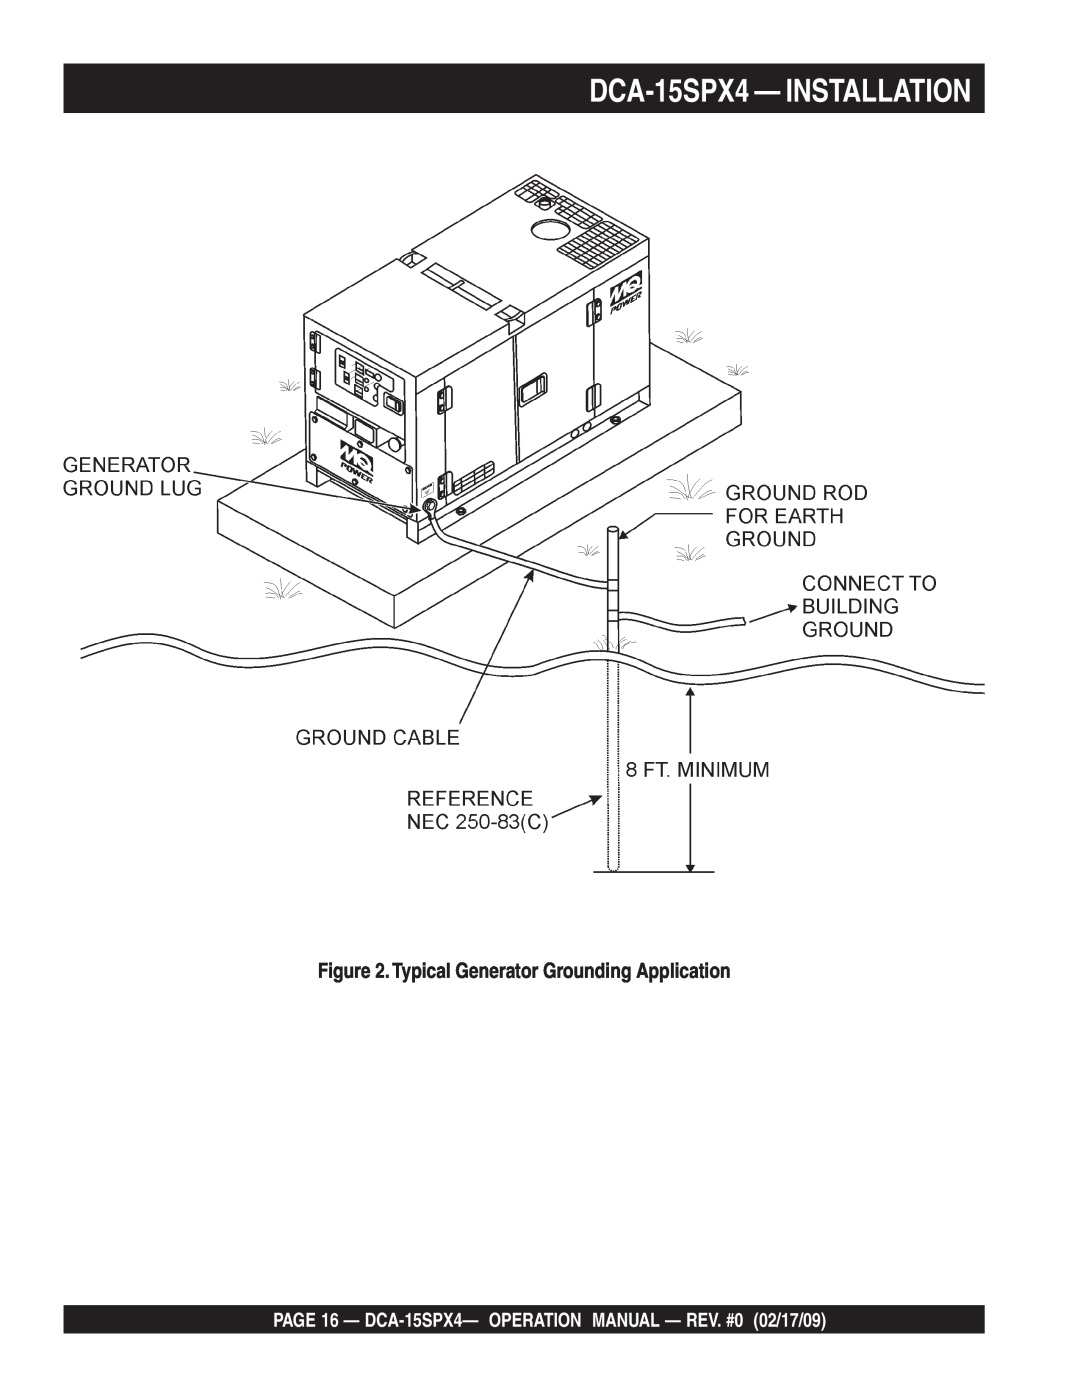 Multiquip operation manual DCA-15SPX4 - INSTALLATION, Typical Generator Grounding Application 